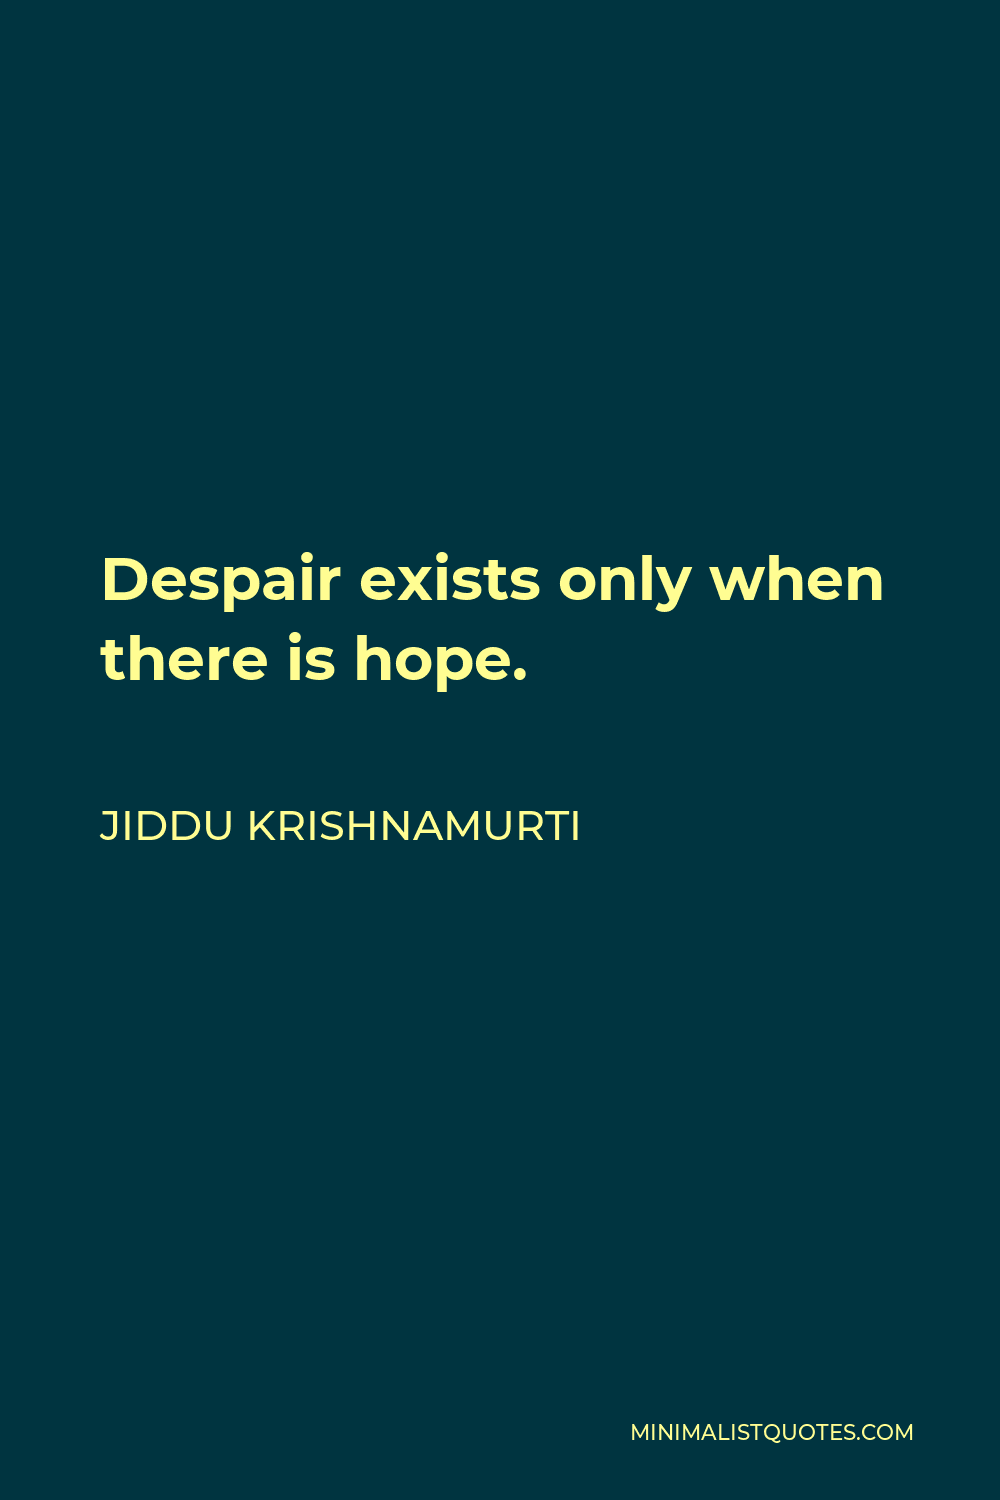 Jiddu Krishnamurti Quote - Despair exists only when there is hope.